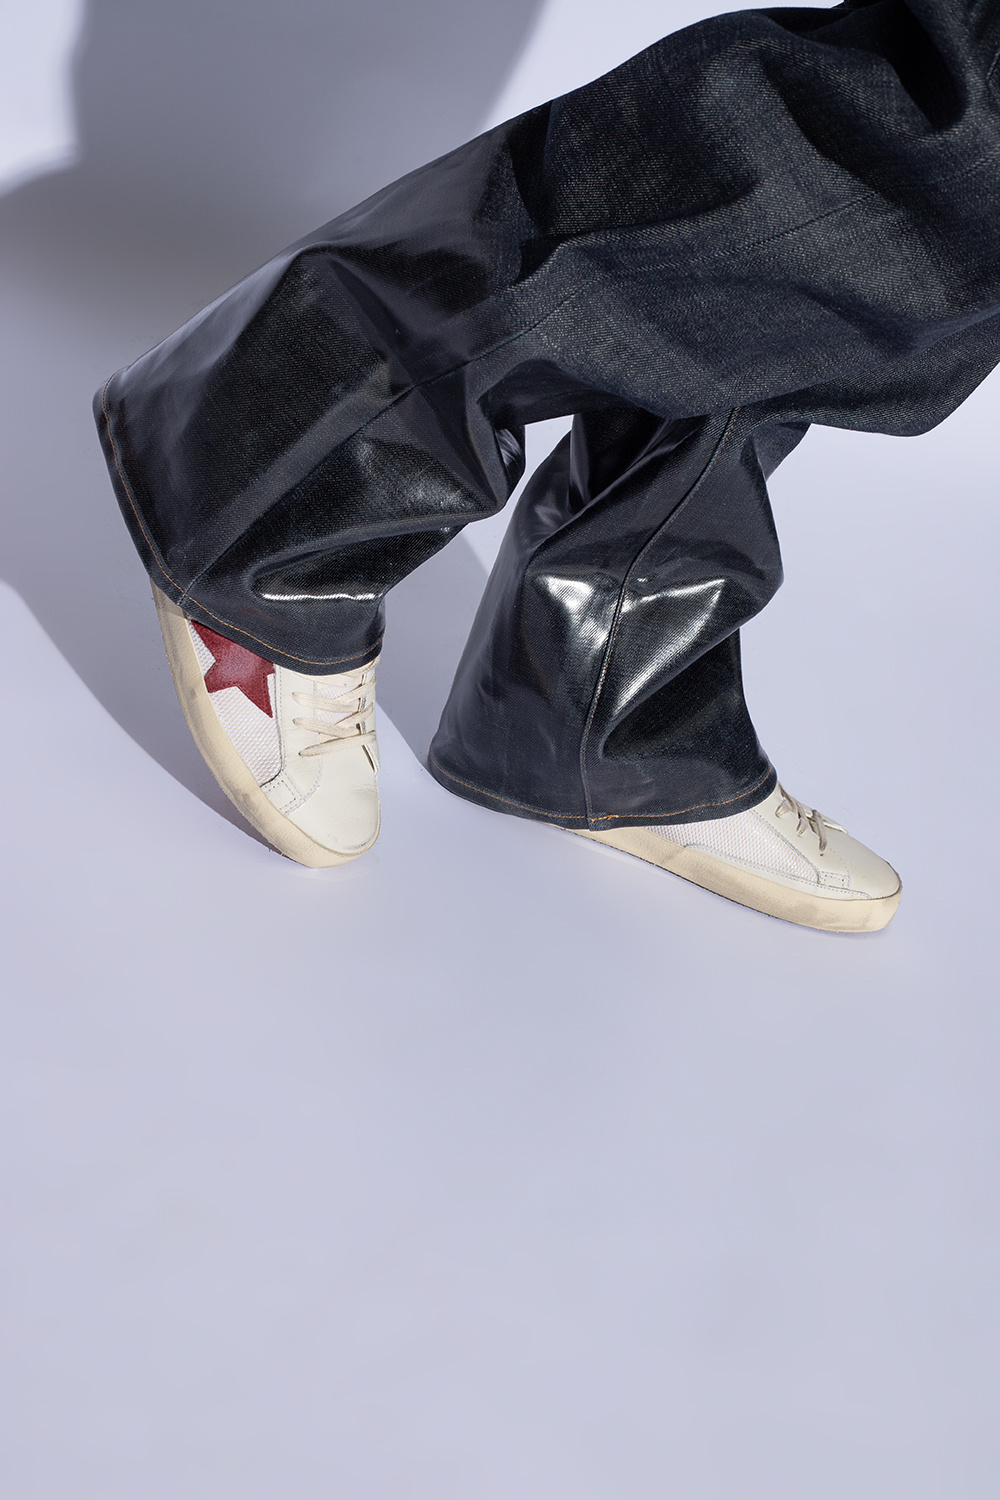 Golden Goose ‘Super Star Double Quarter With List’ sneakers